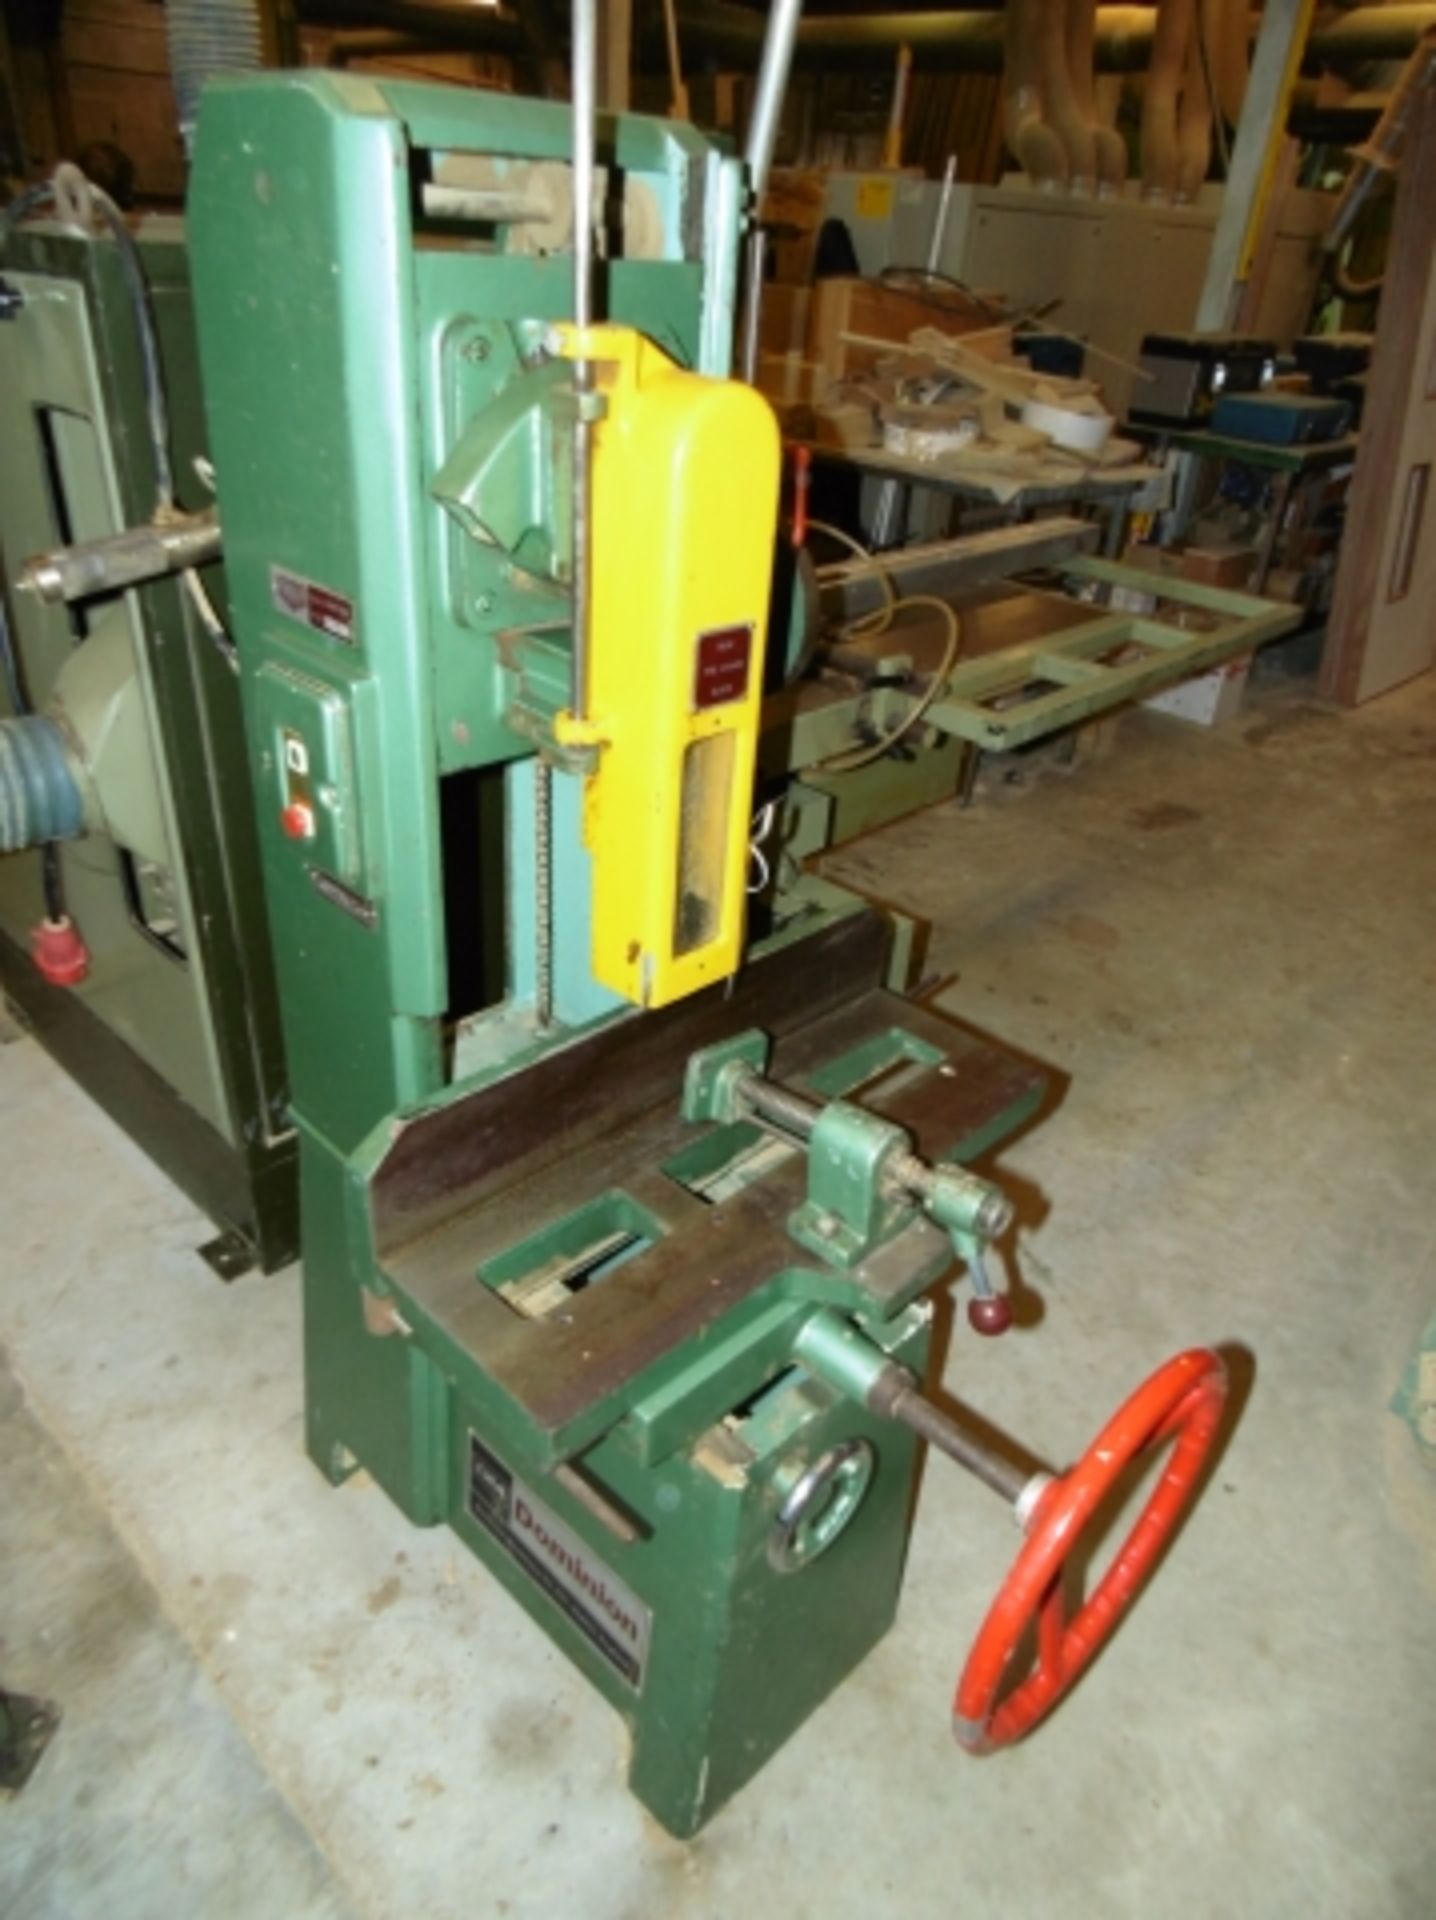 * Dominion Type BAA Vertical Morticer; max spindle speed 3000 RPM; 3 phase; machine no 1380